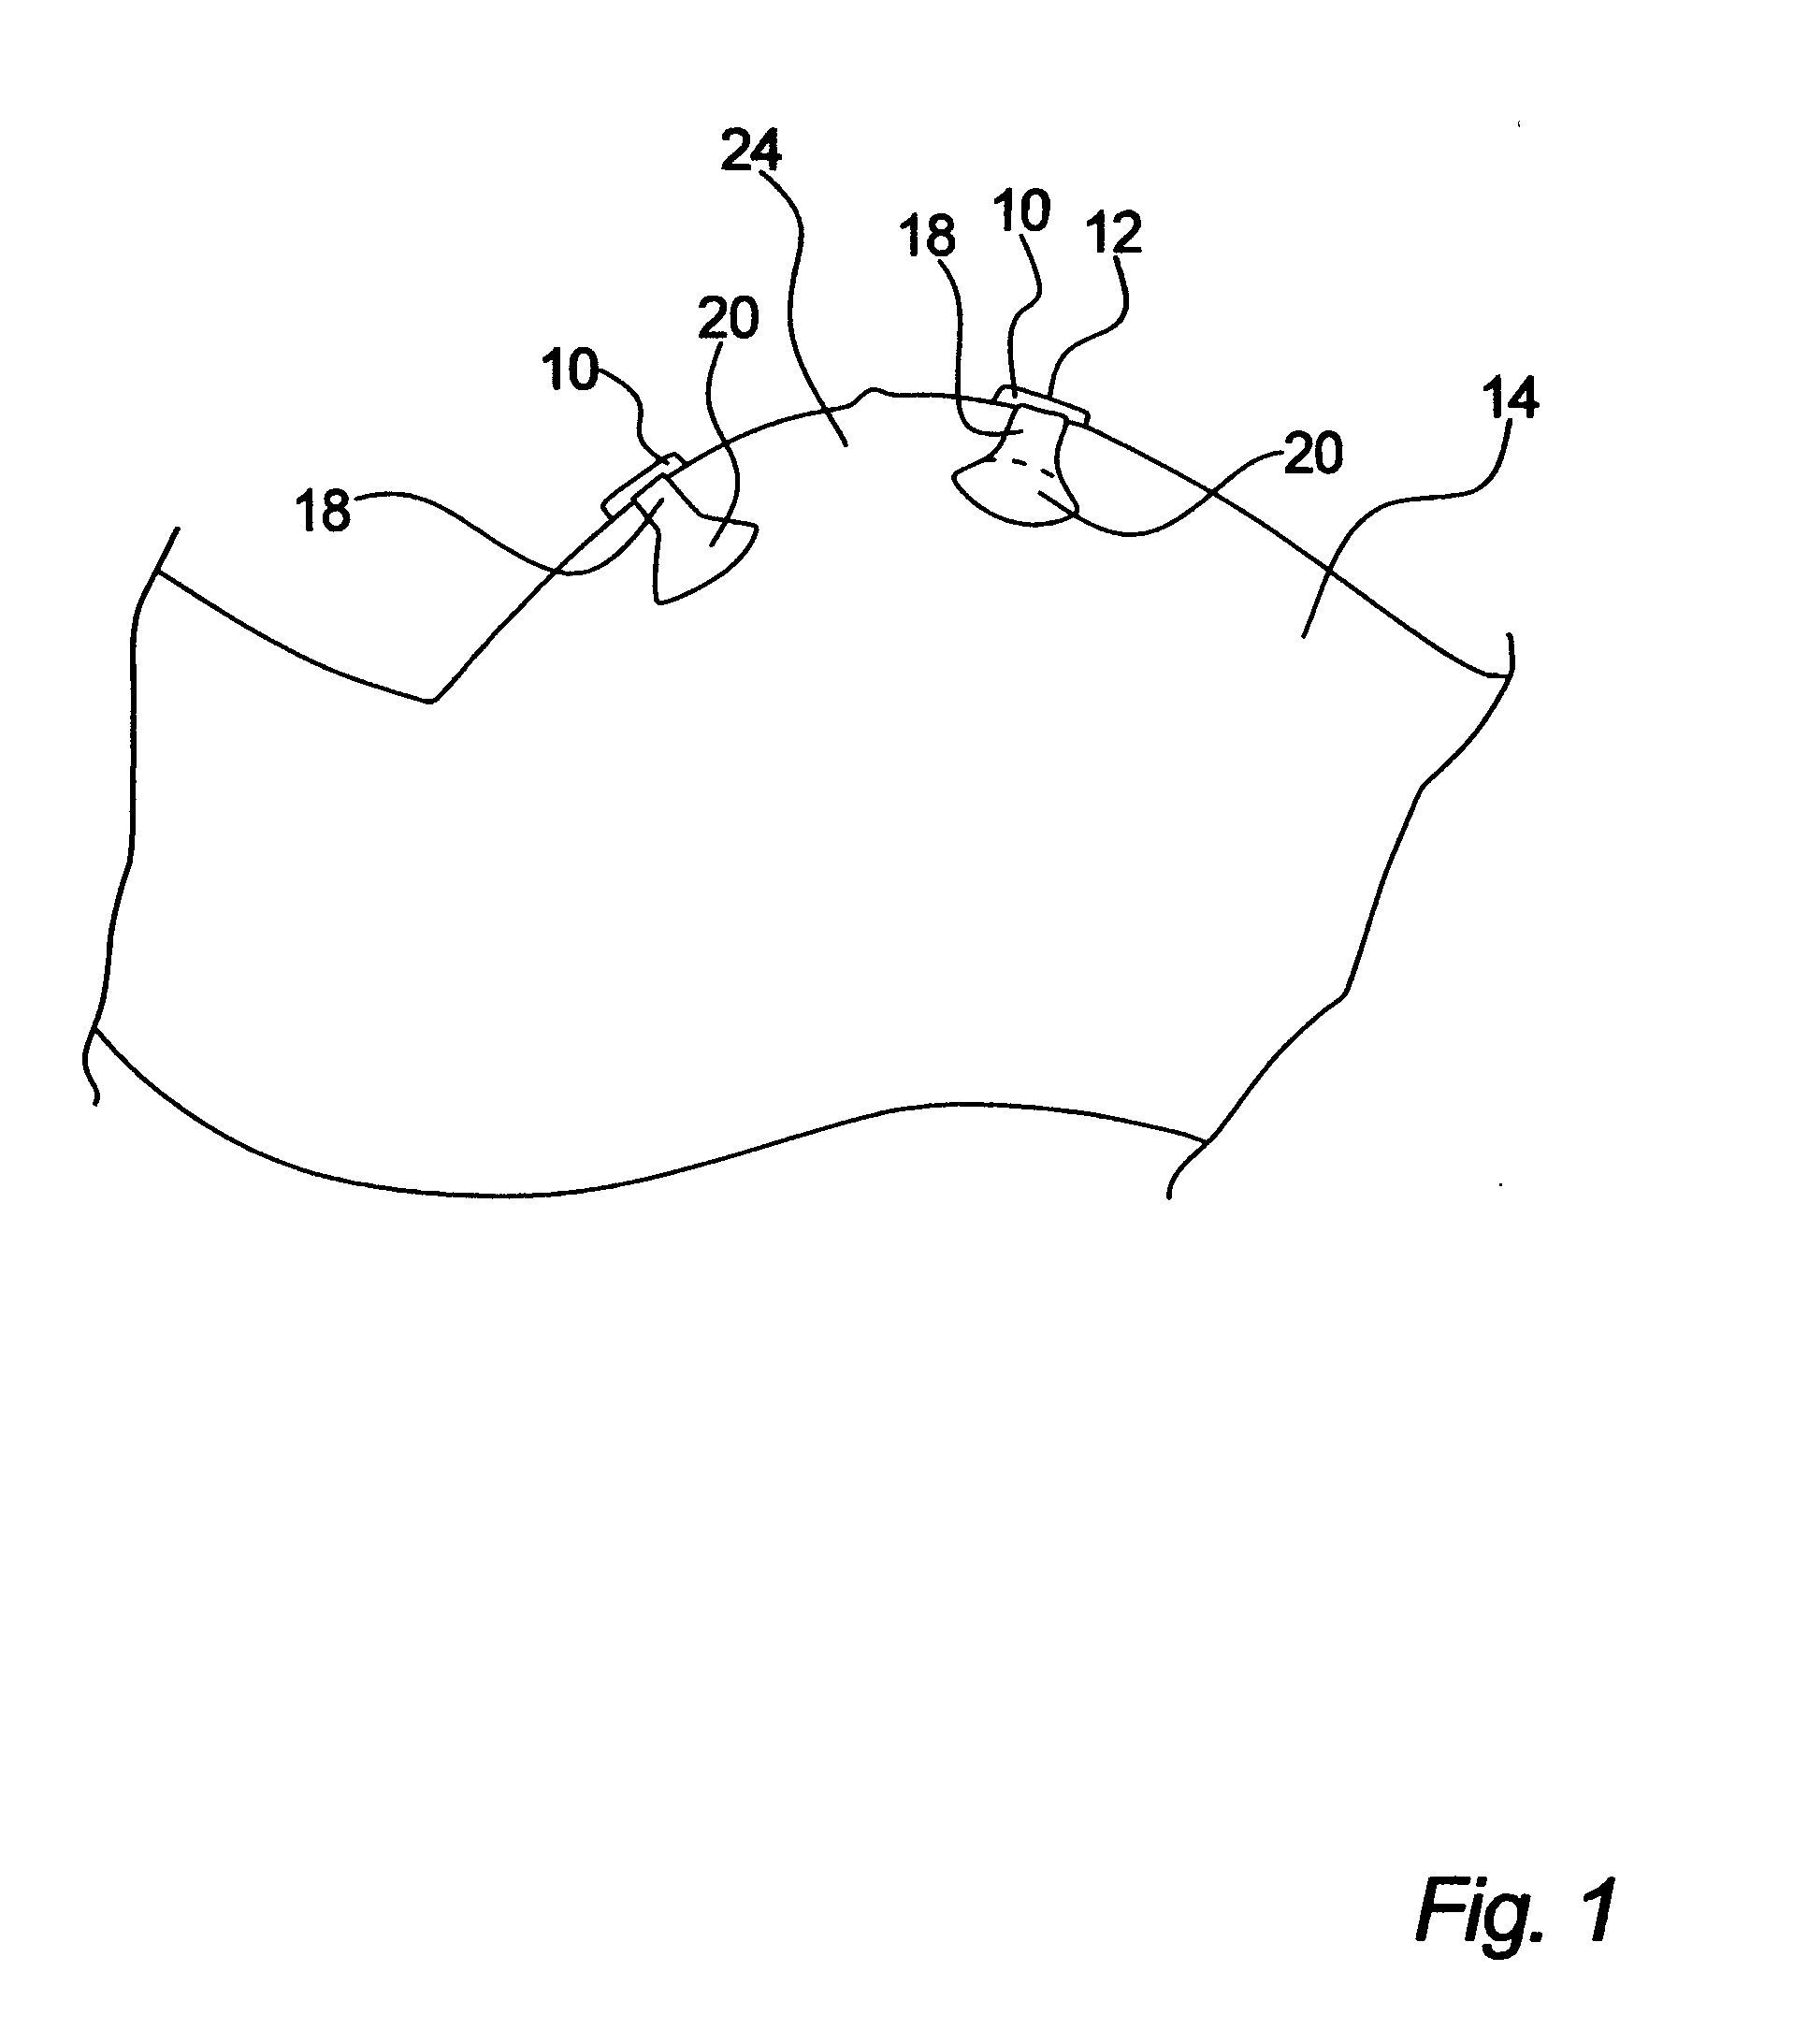 Adhesive strap for foetal monitoring transducers and the like